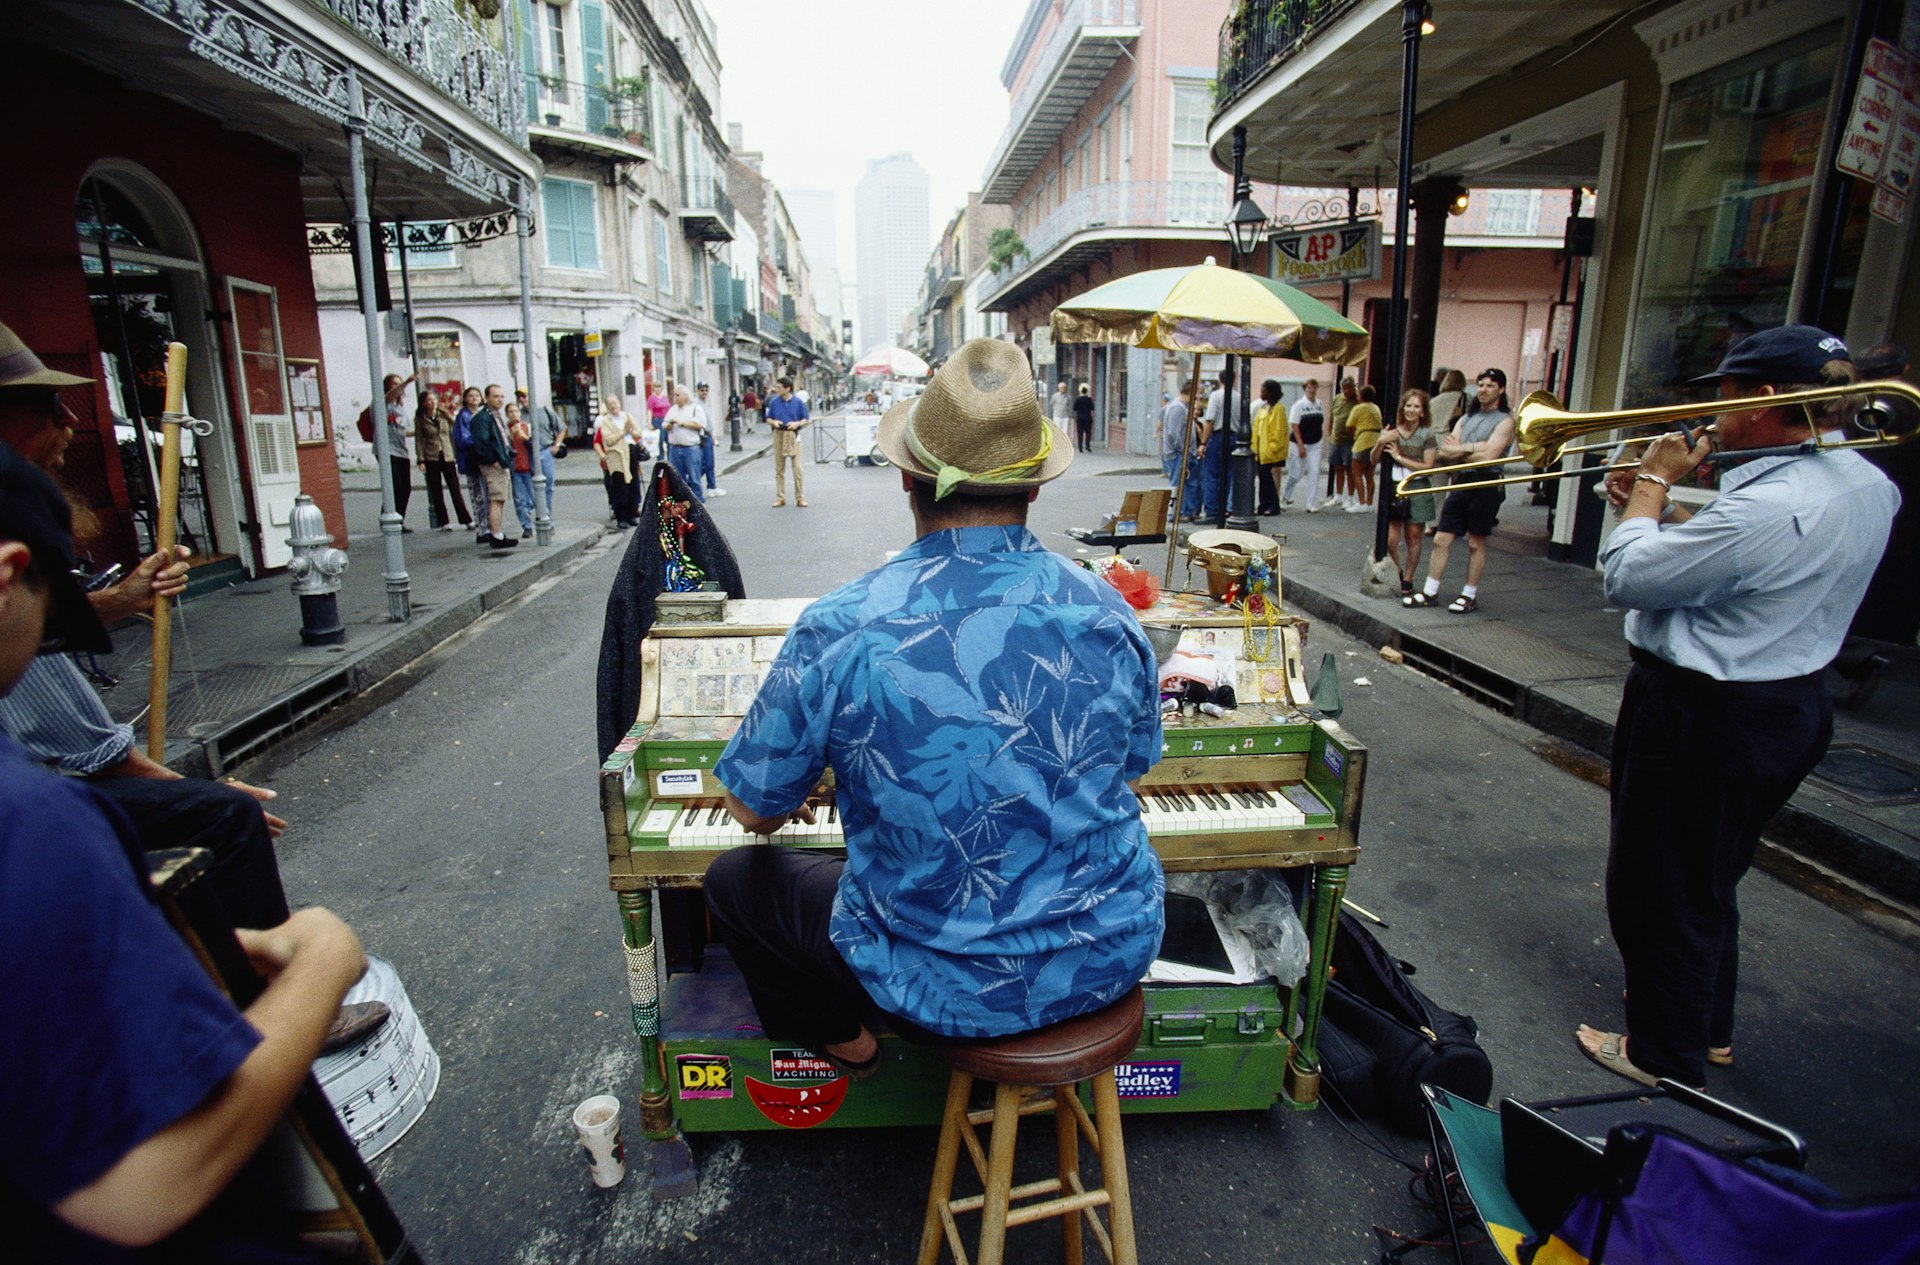 David Roe, a pianist, performs on his colorful piano along with fellow street musicians in Royal Street in New Orleans